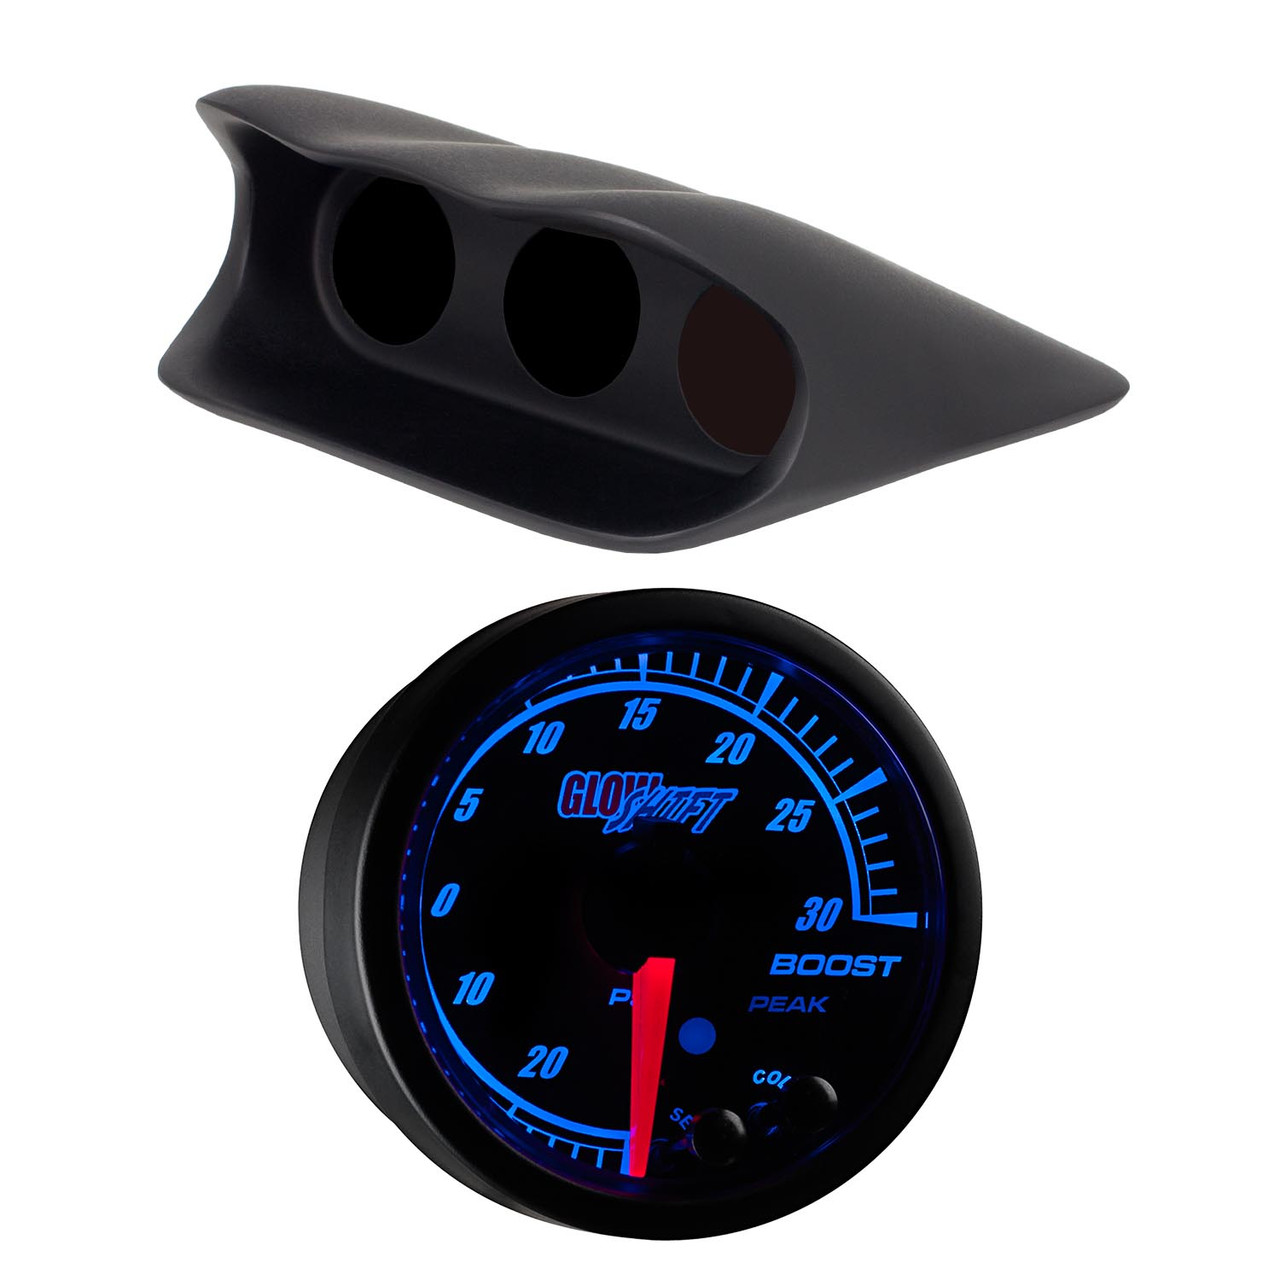 Learn Key Features of our 2002-2005 Dodge Ram Dash Cover & why